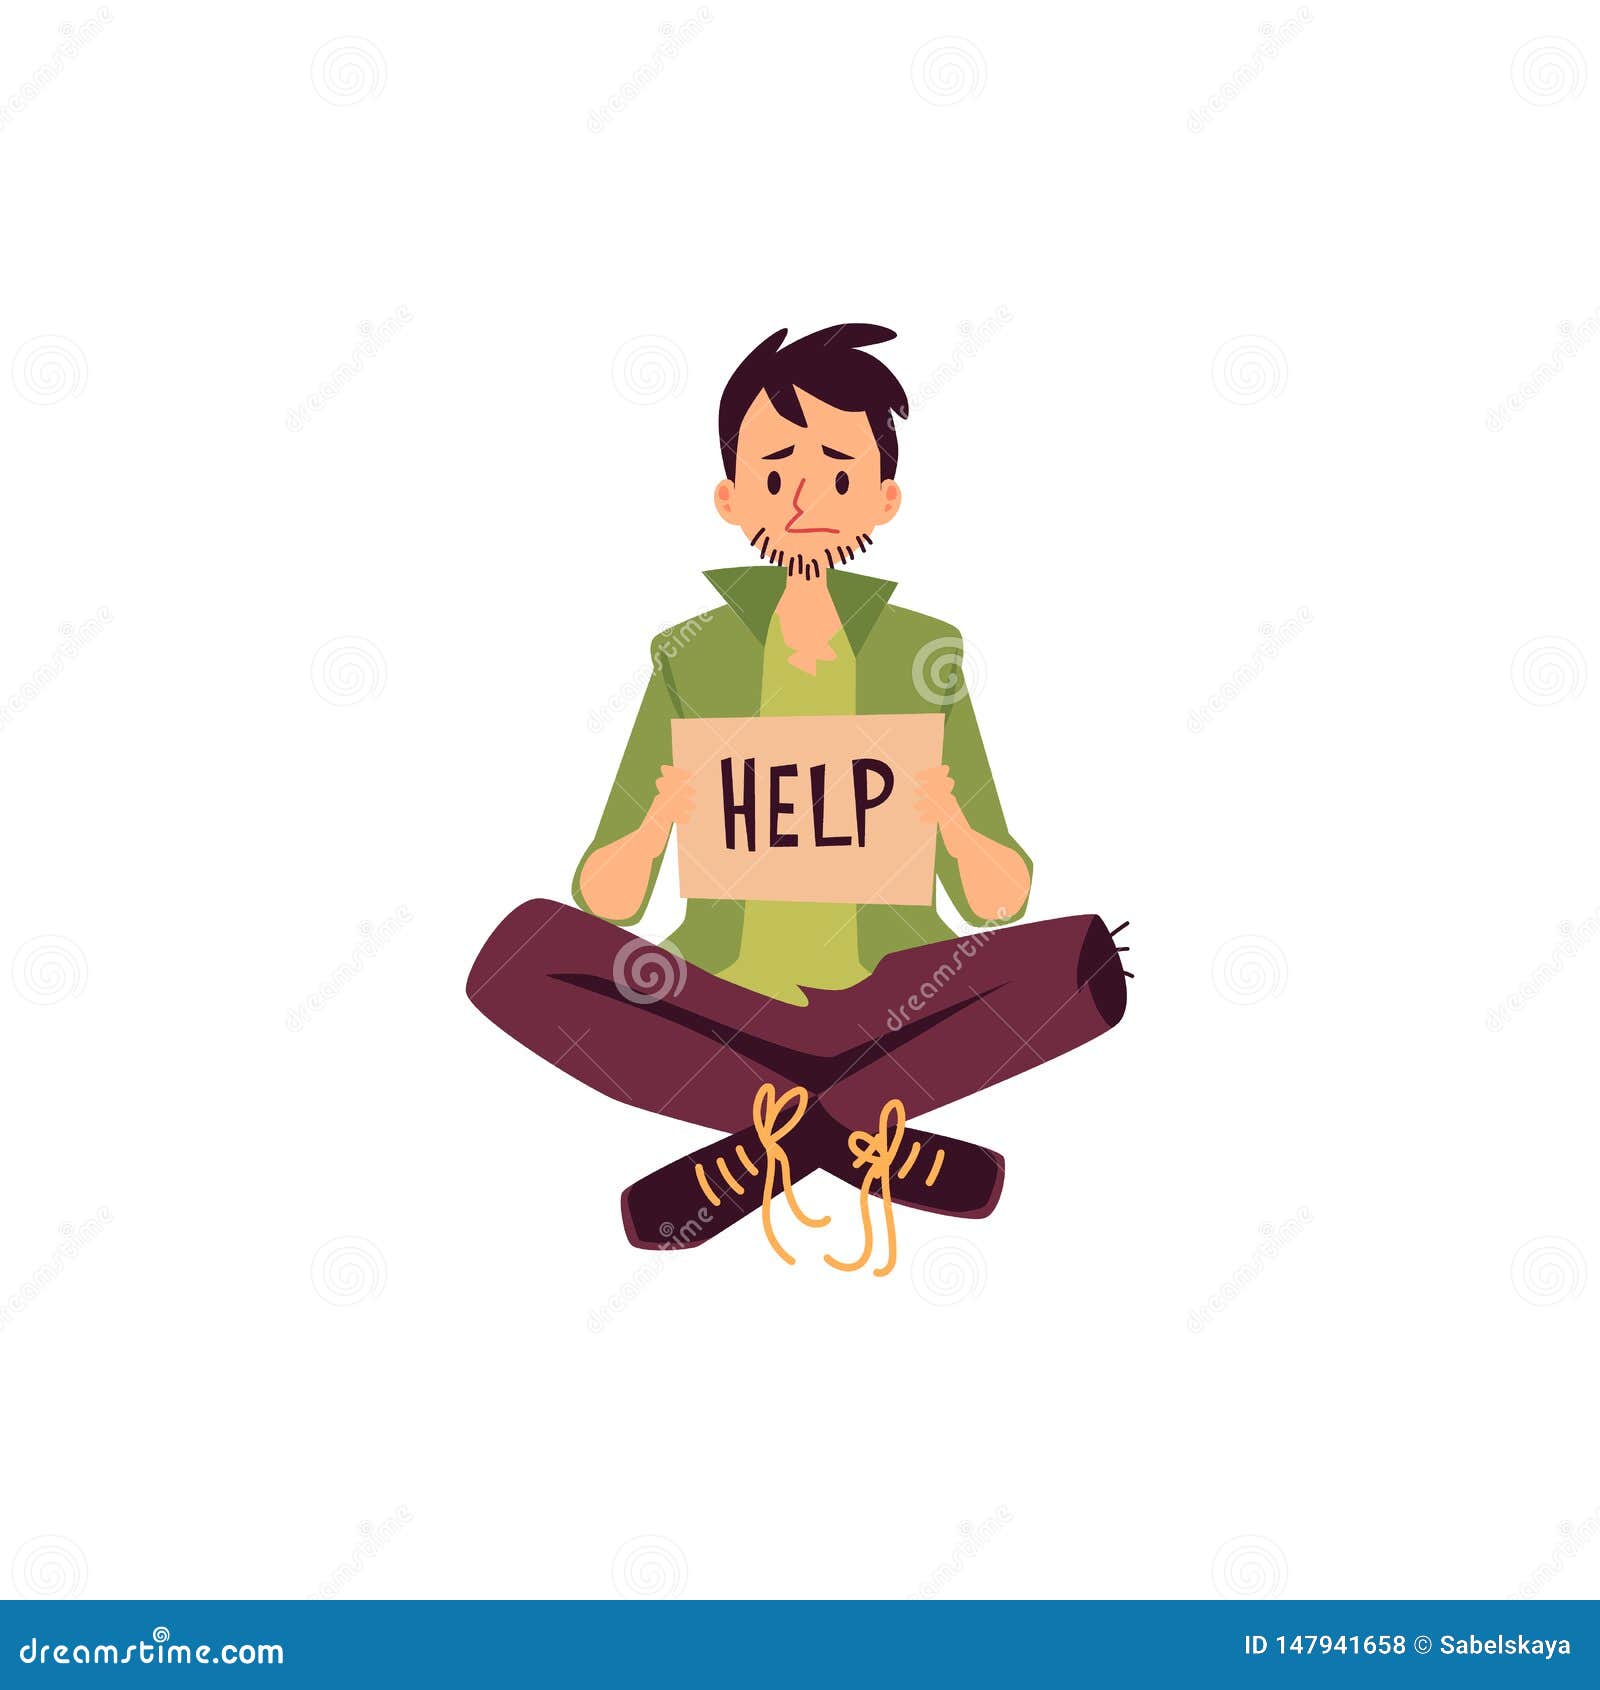 Homeless Man Sitting Legs Crossed and Holding Help Asking Sign Cartoon  Style Stock Vector - Illustration of beggar, character: 147941658